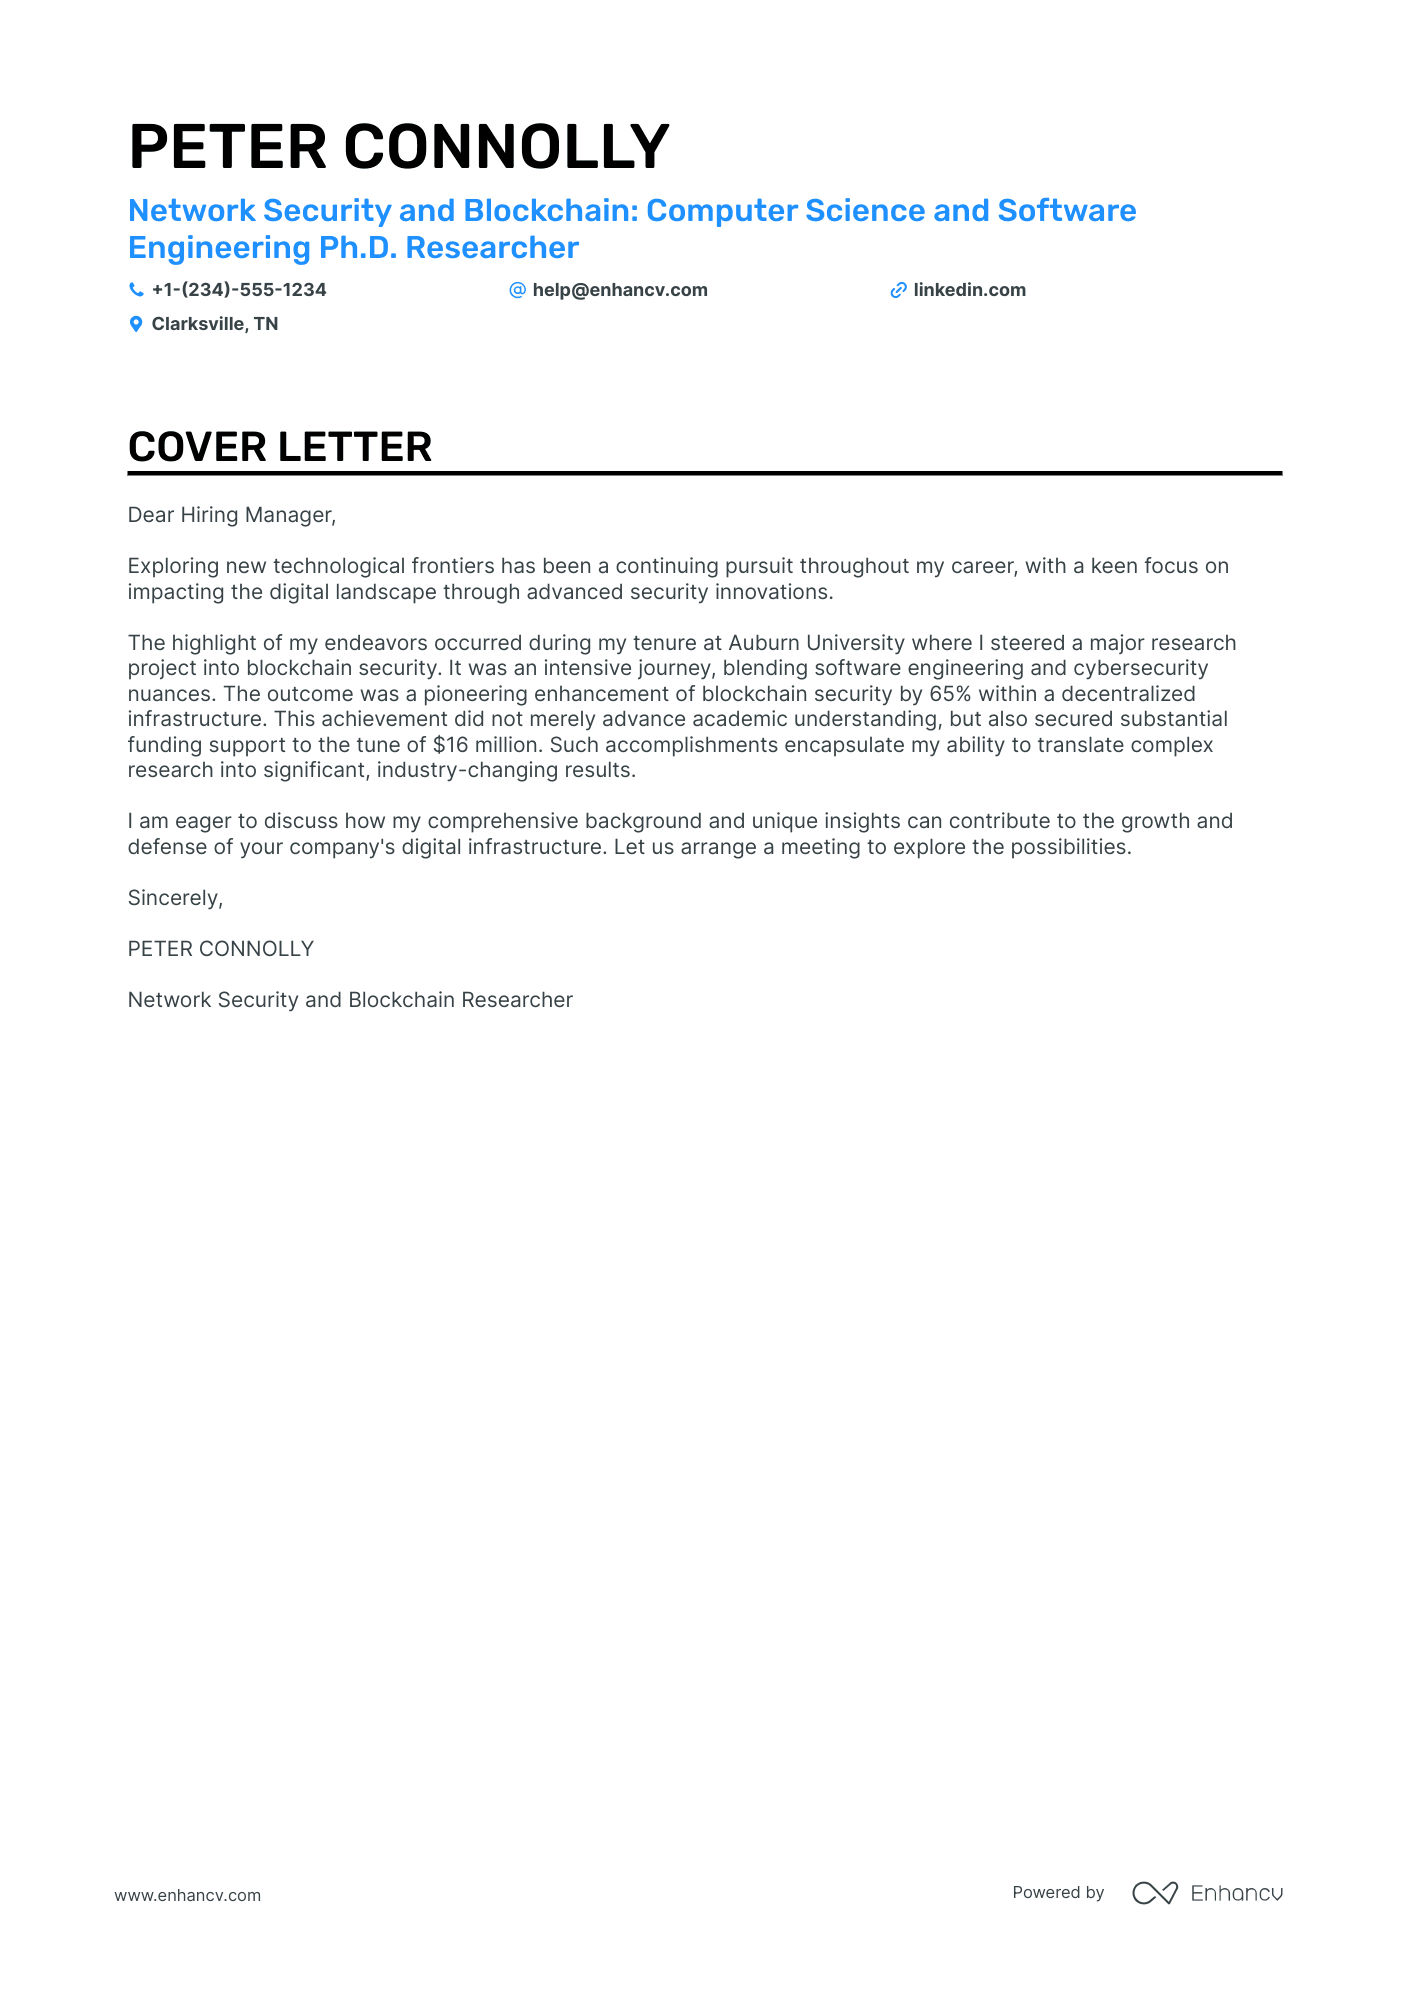 academic paper cover letter